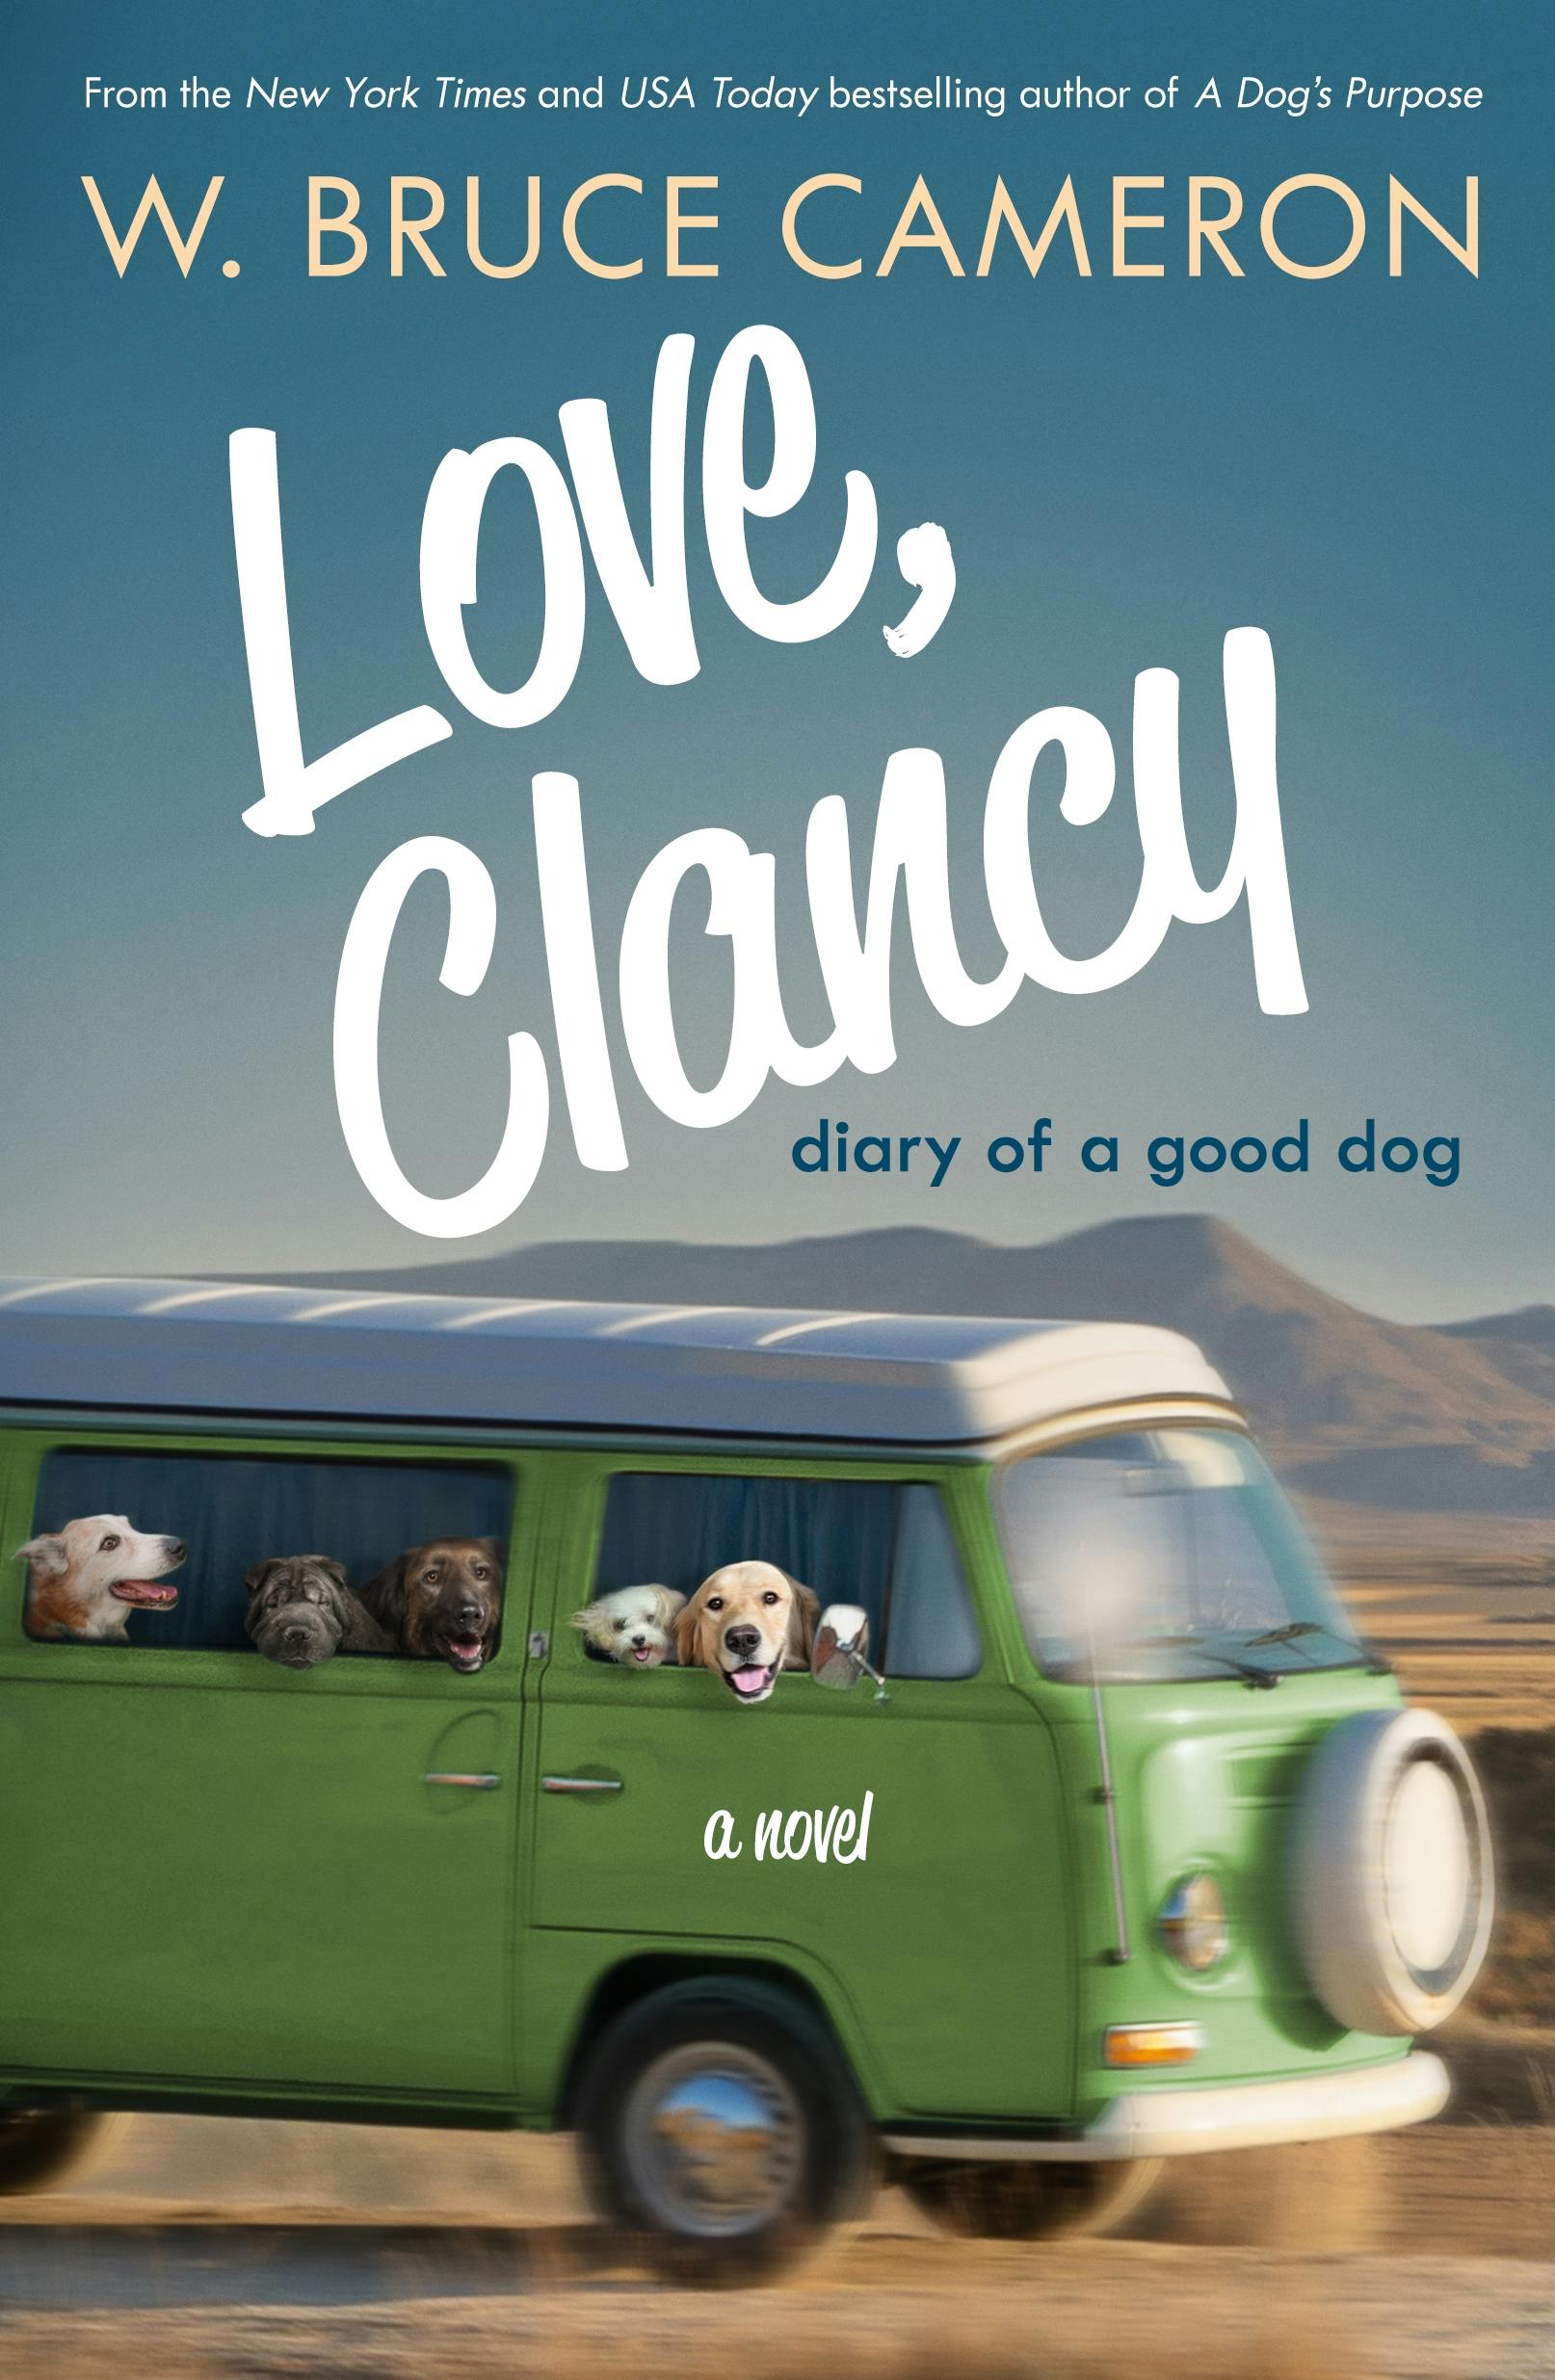 Cover for the book titled as: Love, Clancy